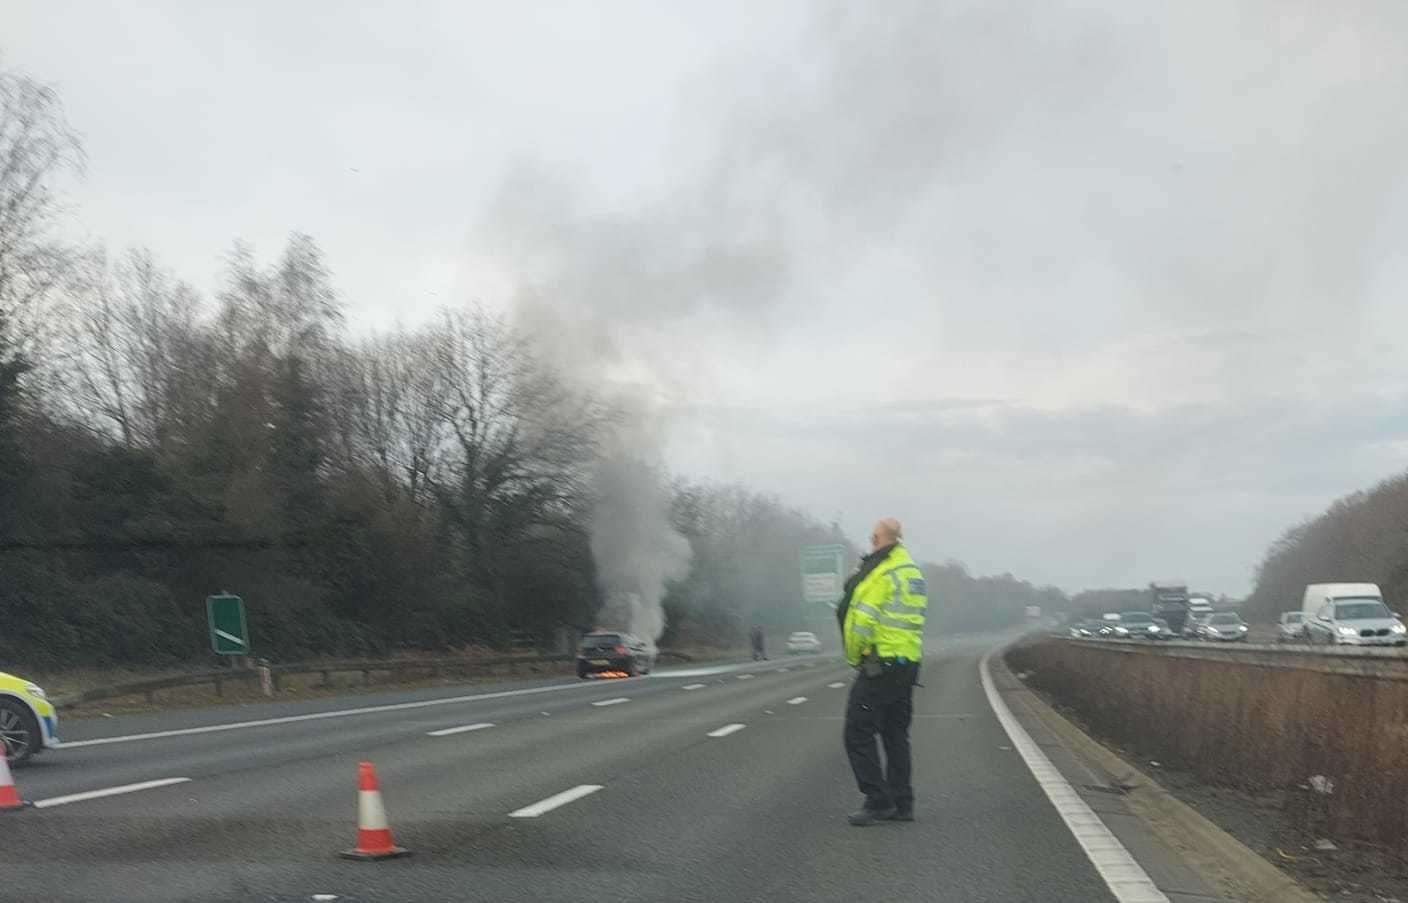 Traffic was brought to a stop on the London-bound carriageway of the A2, near Dartford. Photo: Lisa Parker